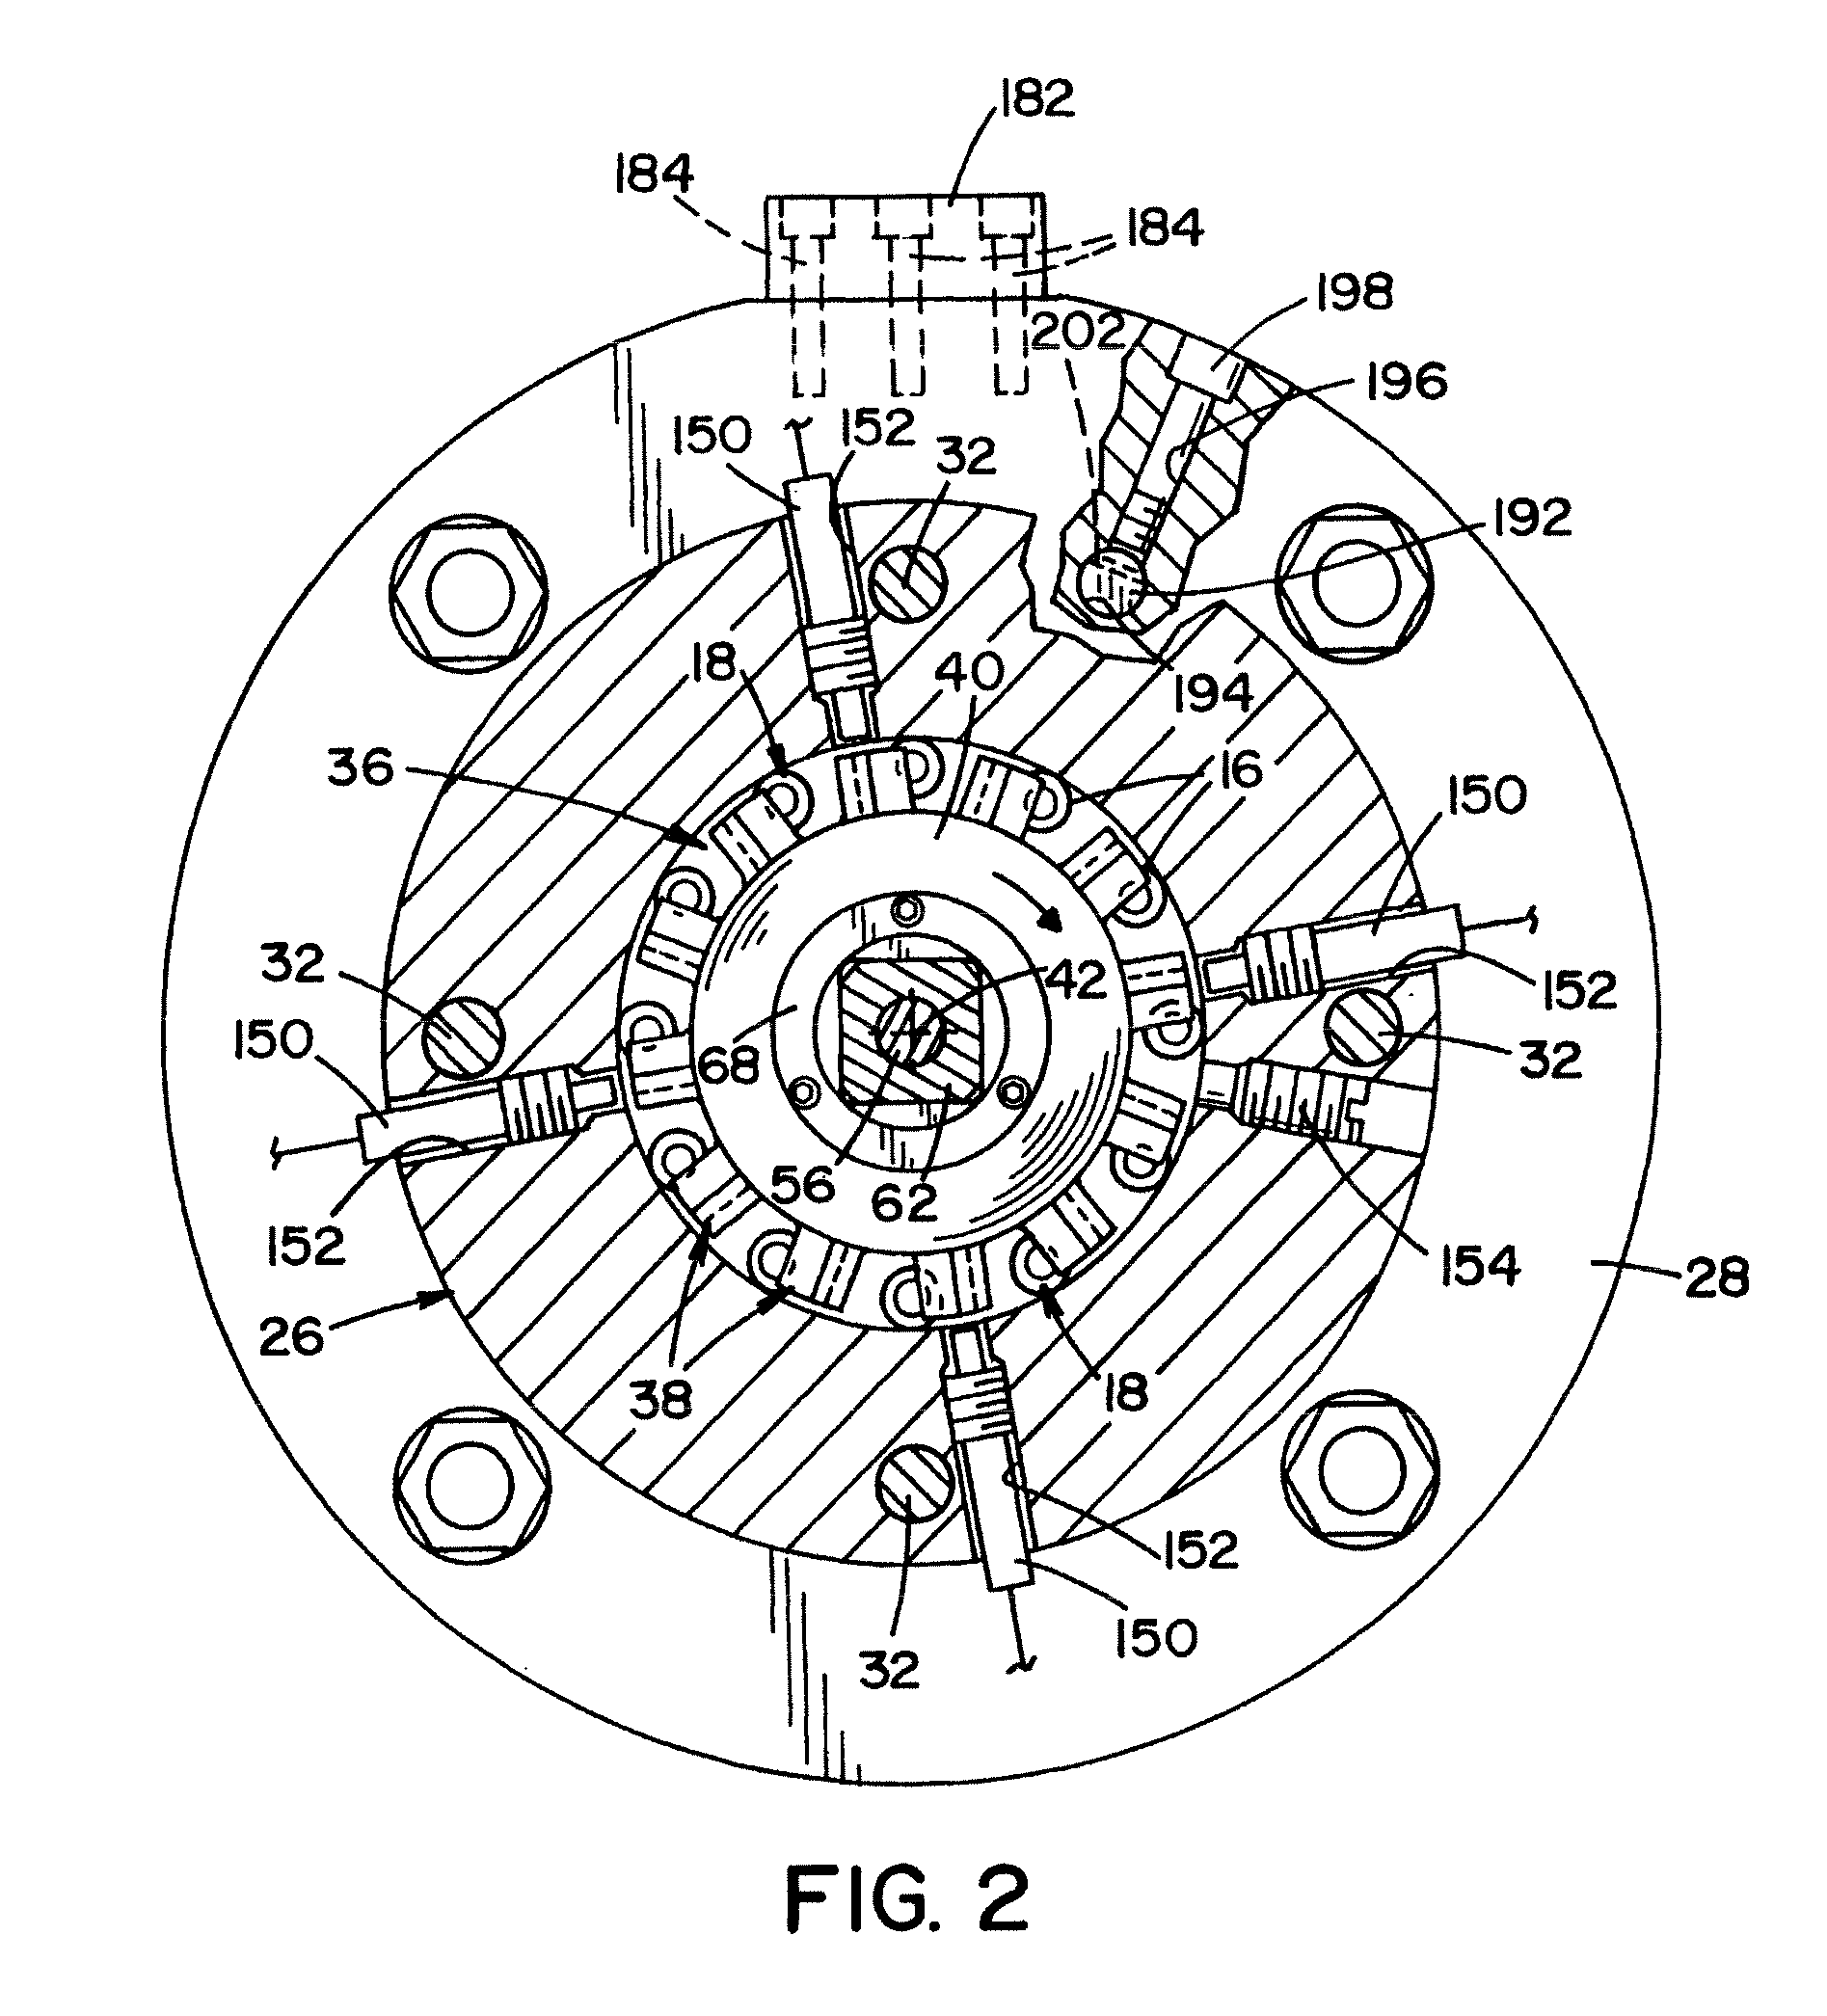 Extruder system and cutting assembly